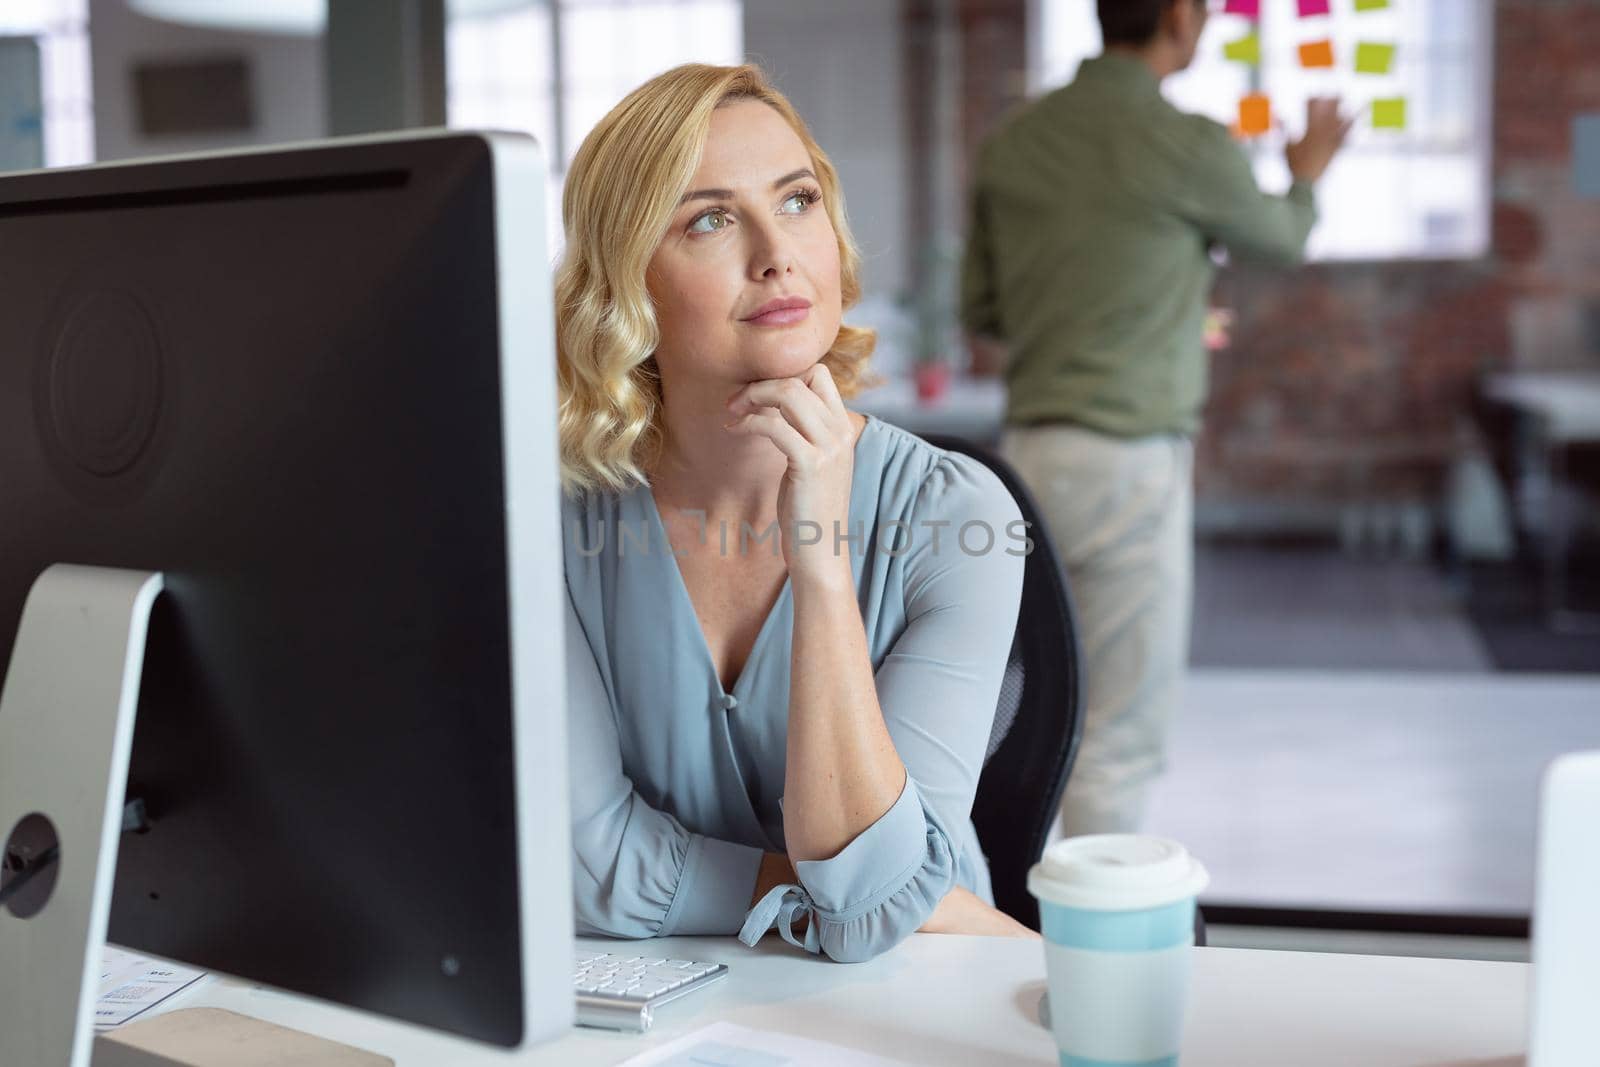 Thoughtful caucasian businesswoman sitting at desk using computer with male colleague in background. working in business at a modern office.